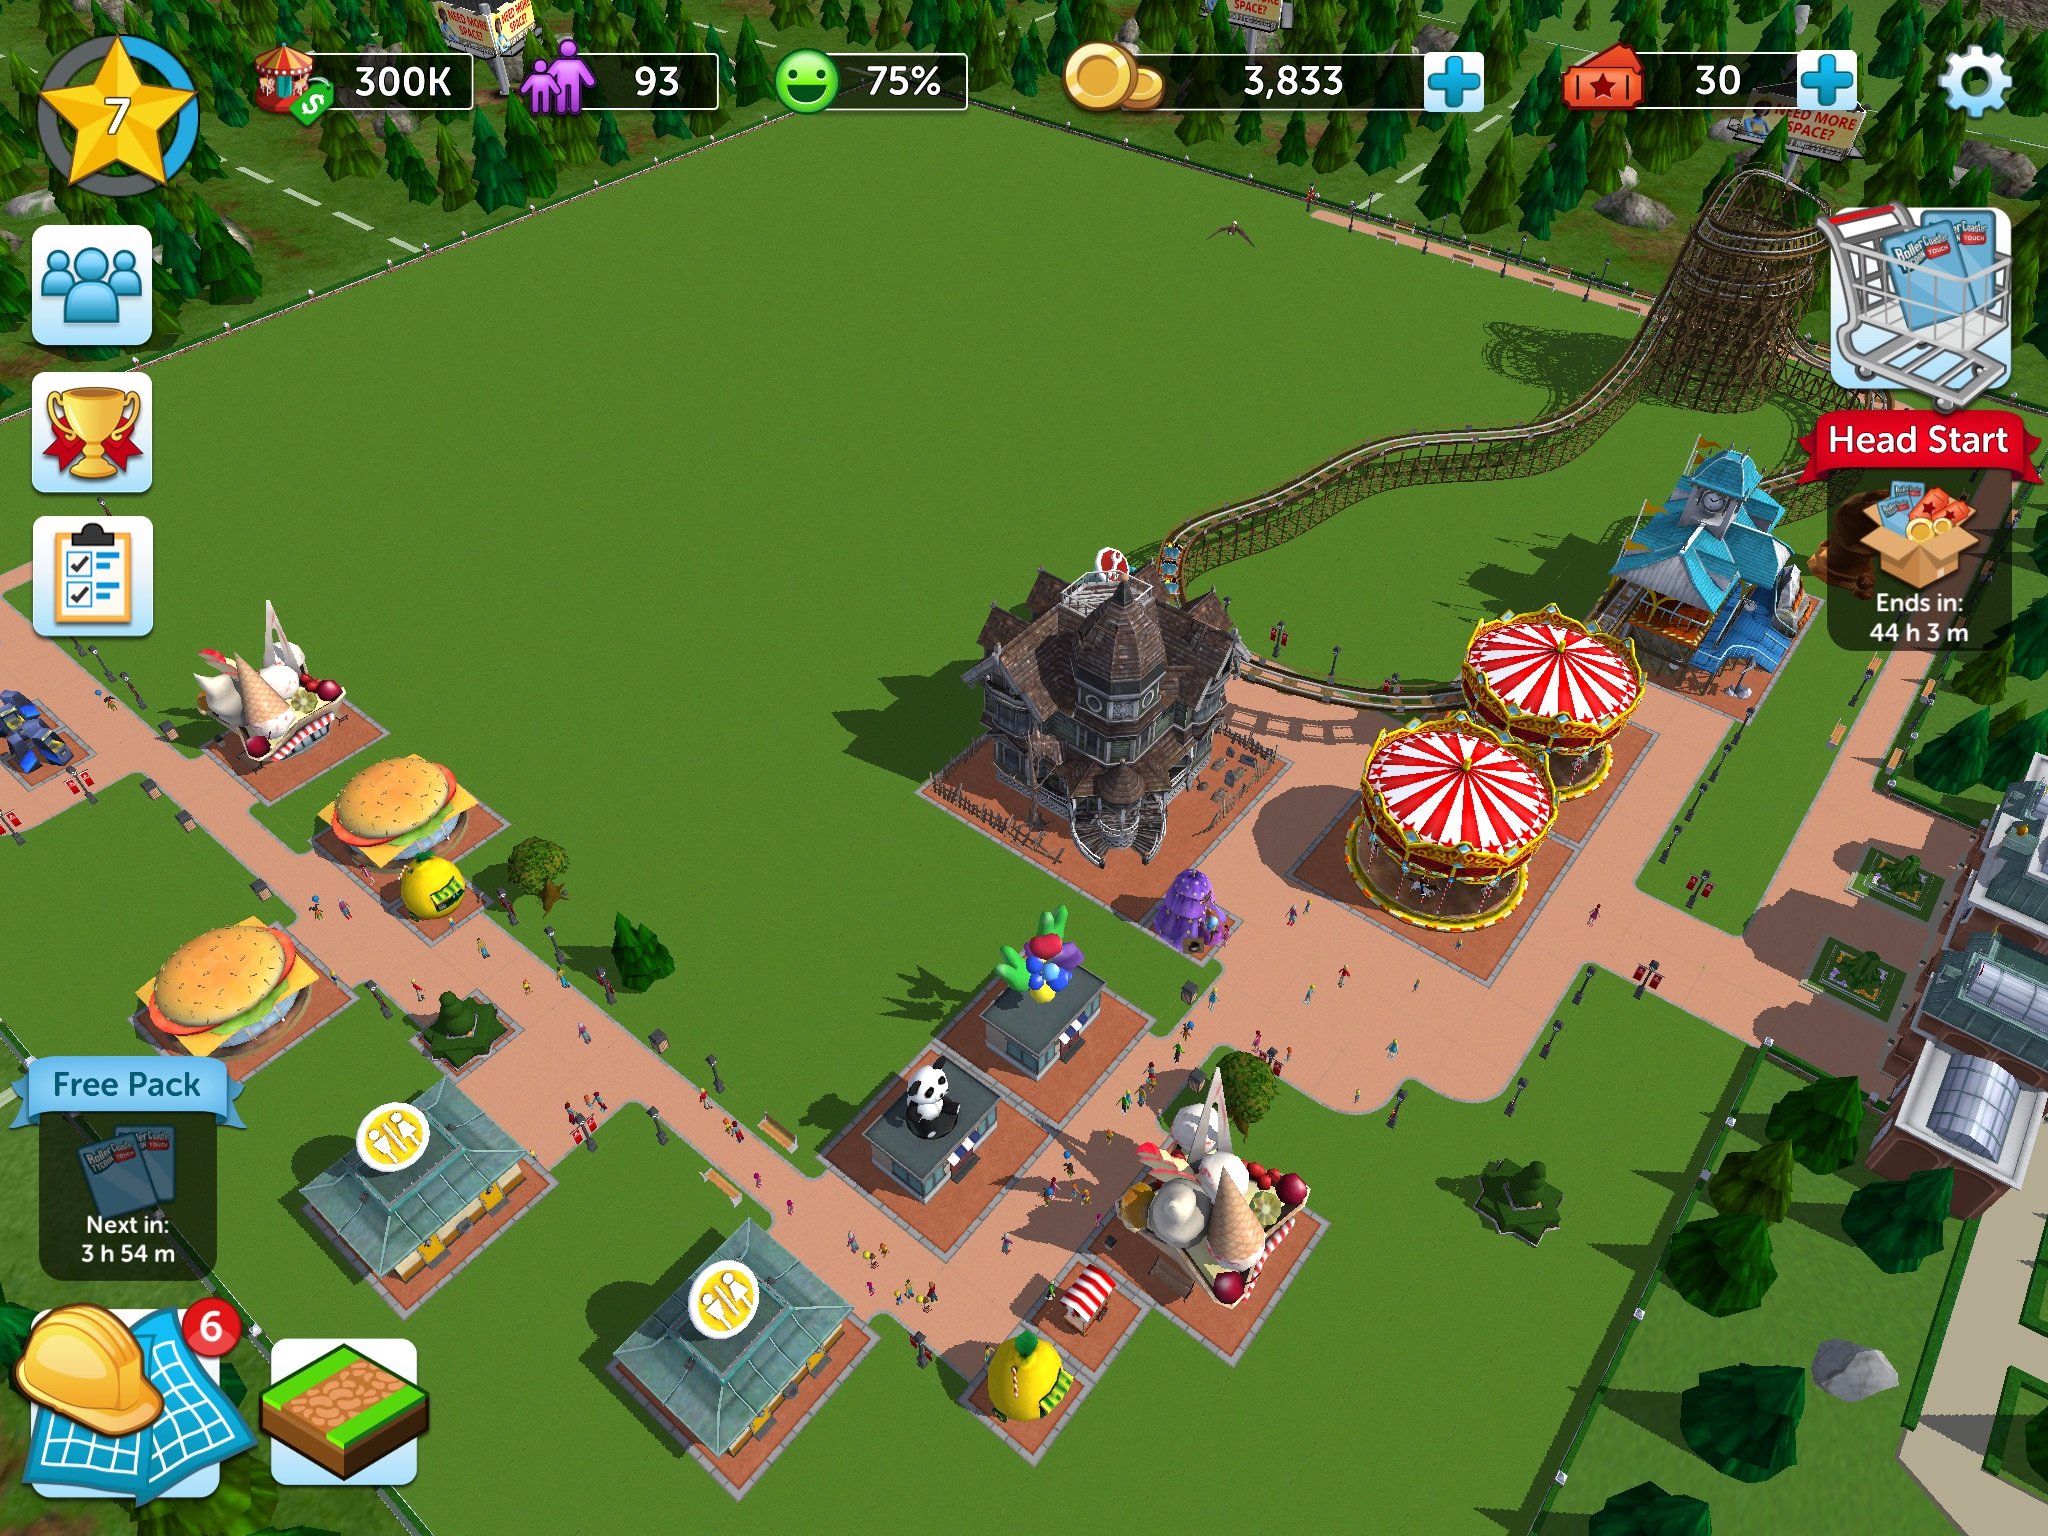 RollerCoaster Tycoon Touch Park OverviewRollerCoaster Tycoon Touch Park Overview